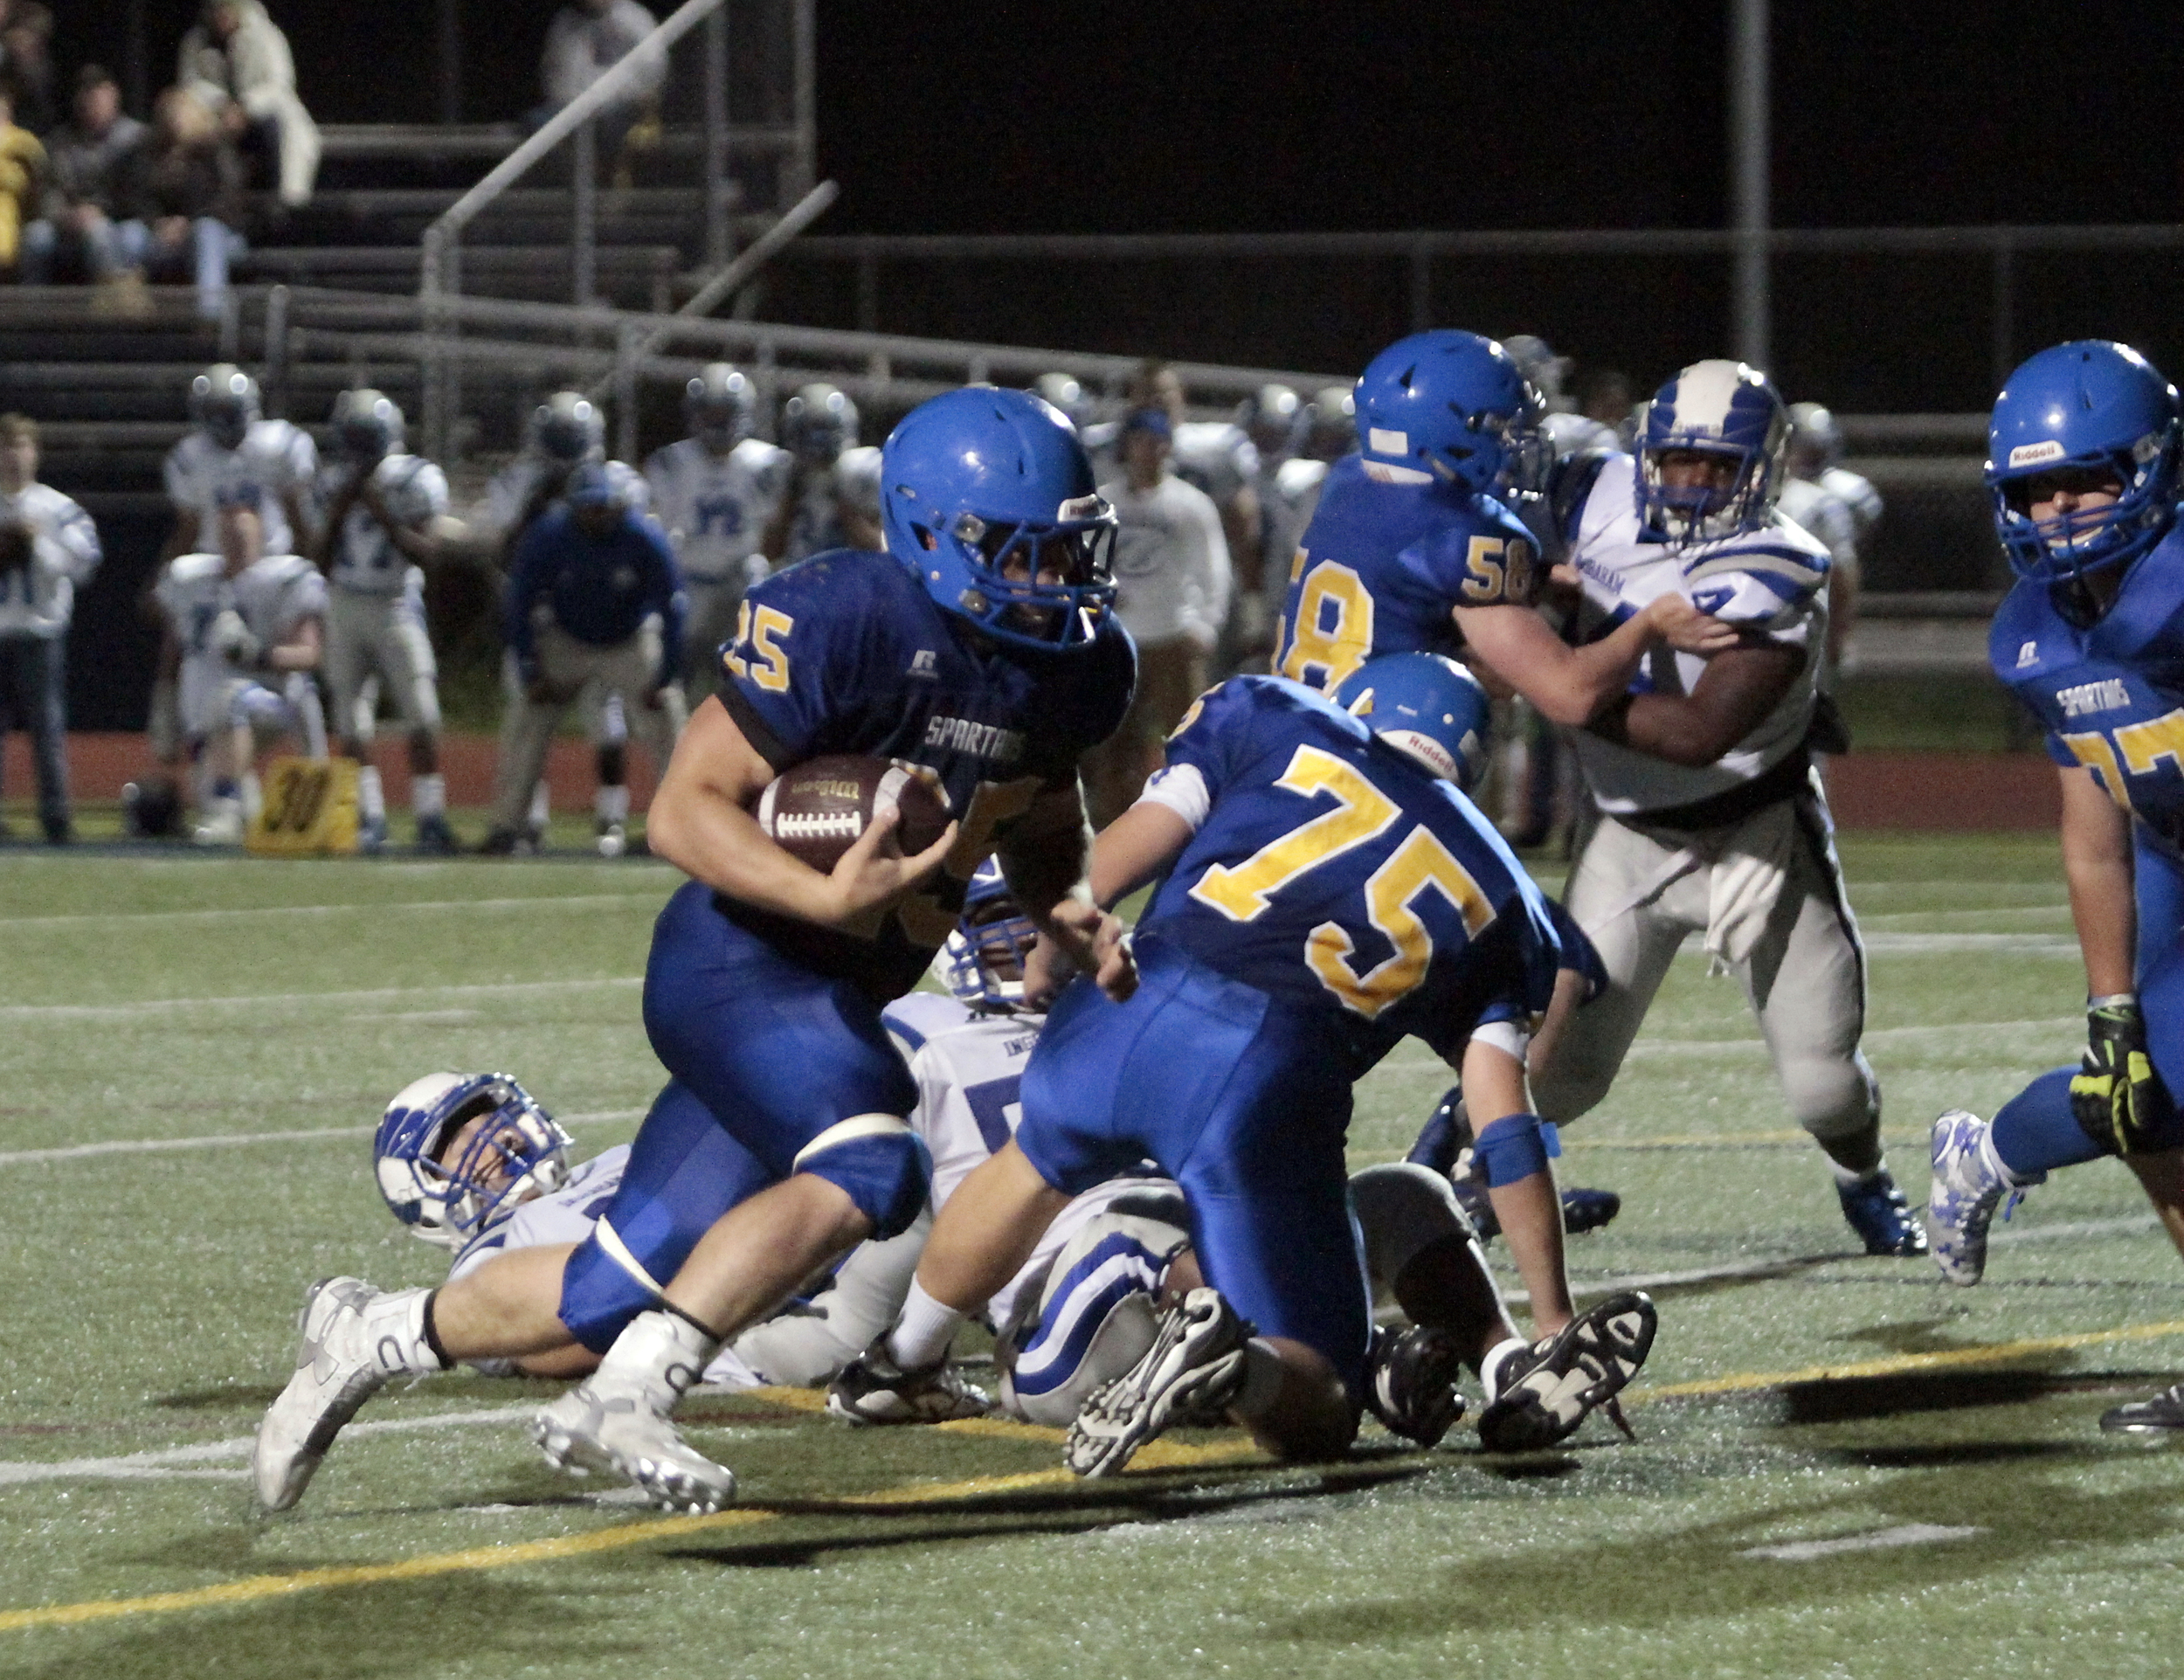  Bainbridge running back/linebacker Sam Wysong plows through the line at home against Ingraham. The senior Spartan gave a stellar early season performance, managing two touchdowns, 23 for 120 yards rushing and one reception for 23 yards.&nbsp;    